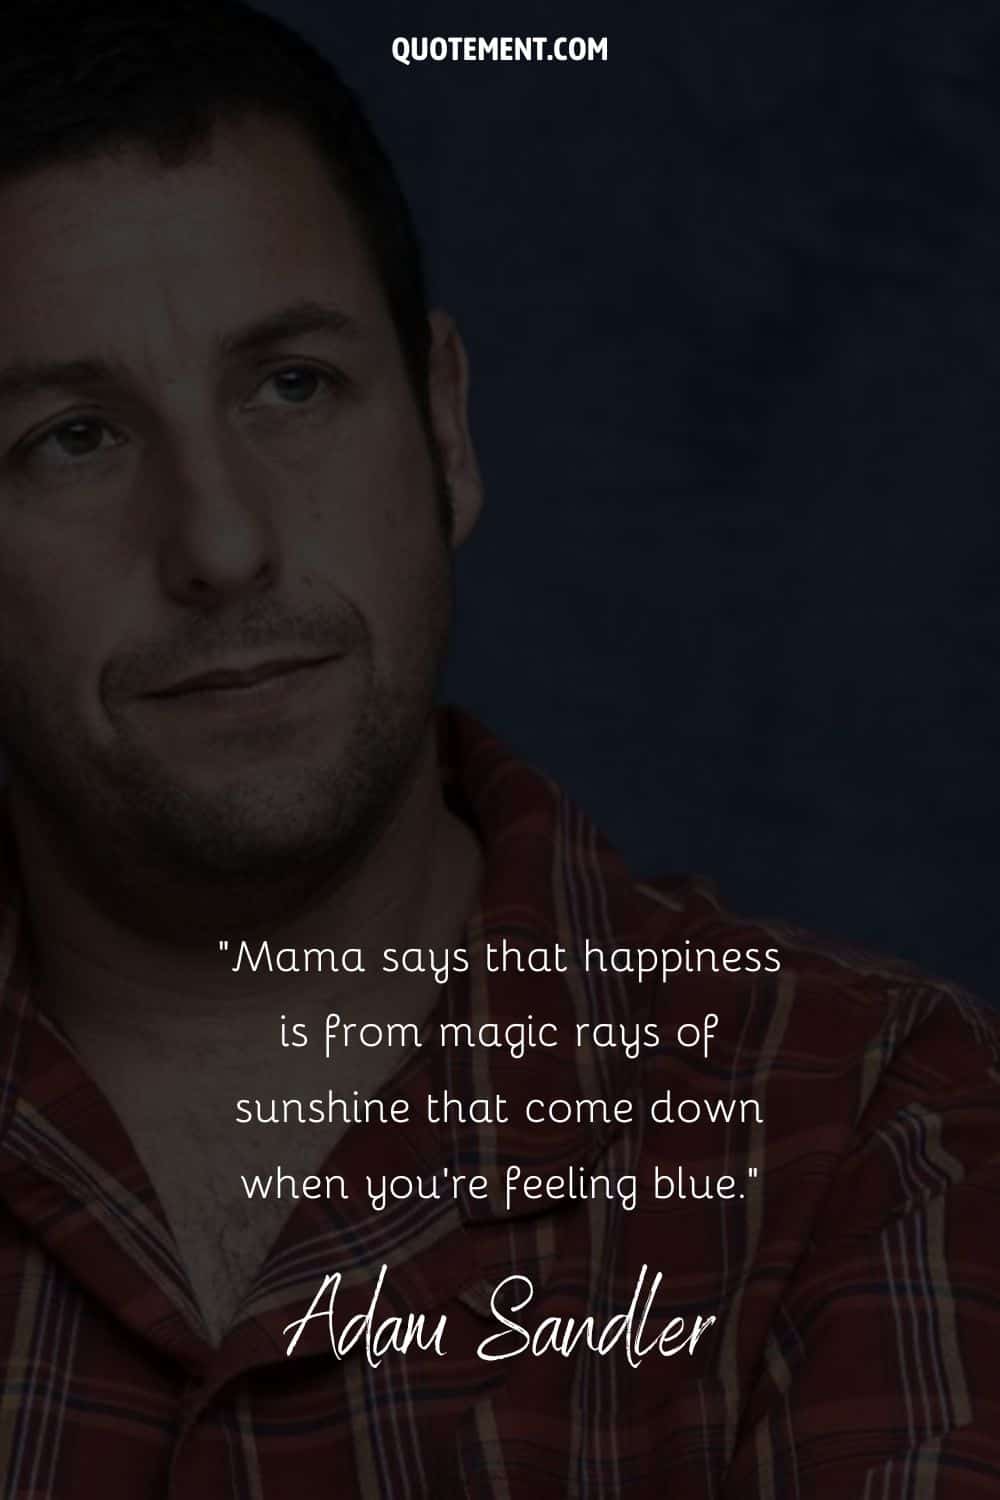 quote by Adam Sandler on happiness